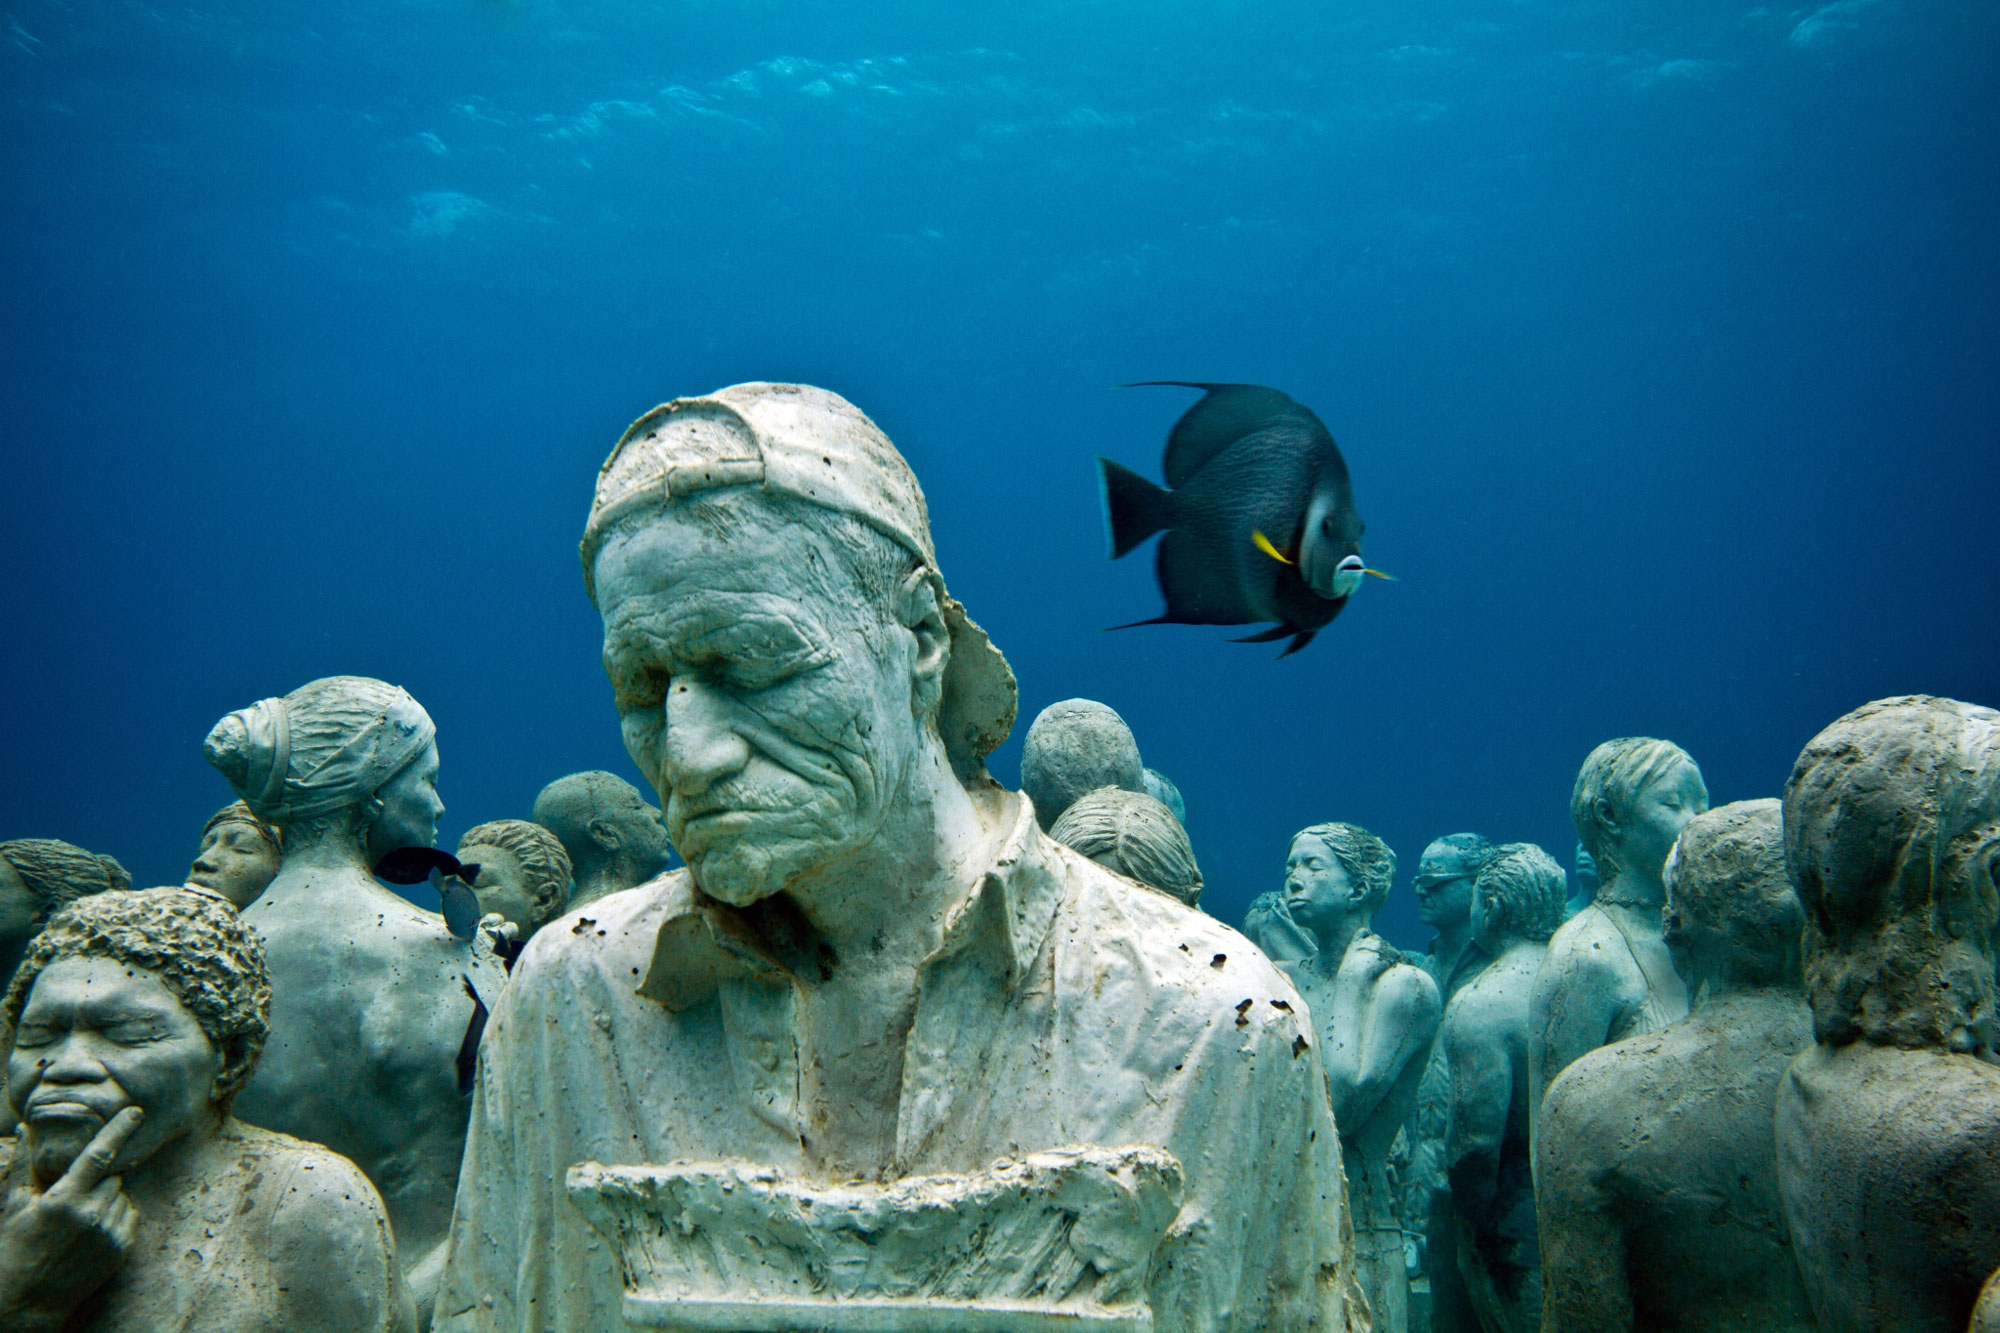 Gallery: The sculpture garden at the bottom of the sea